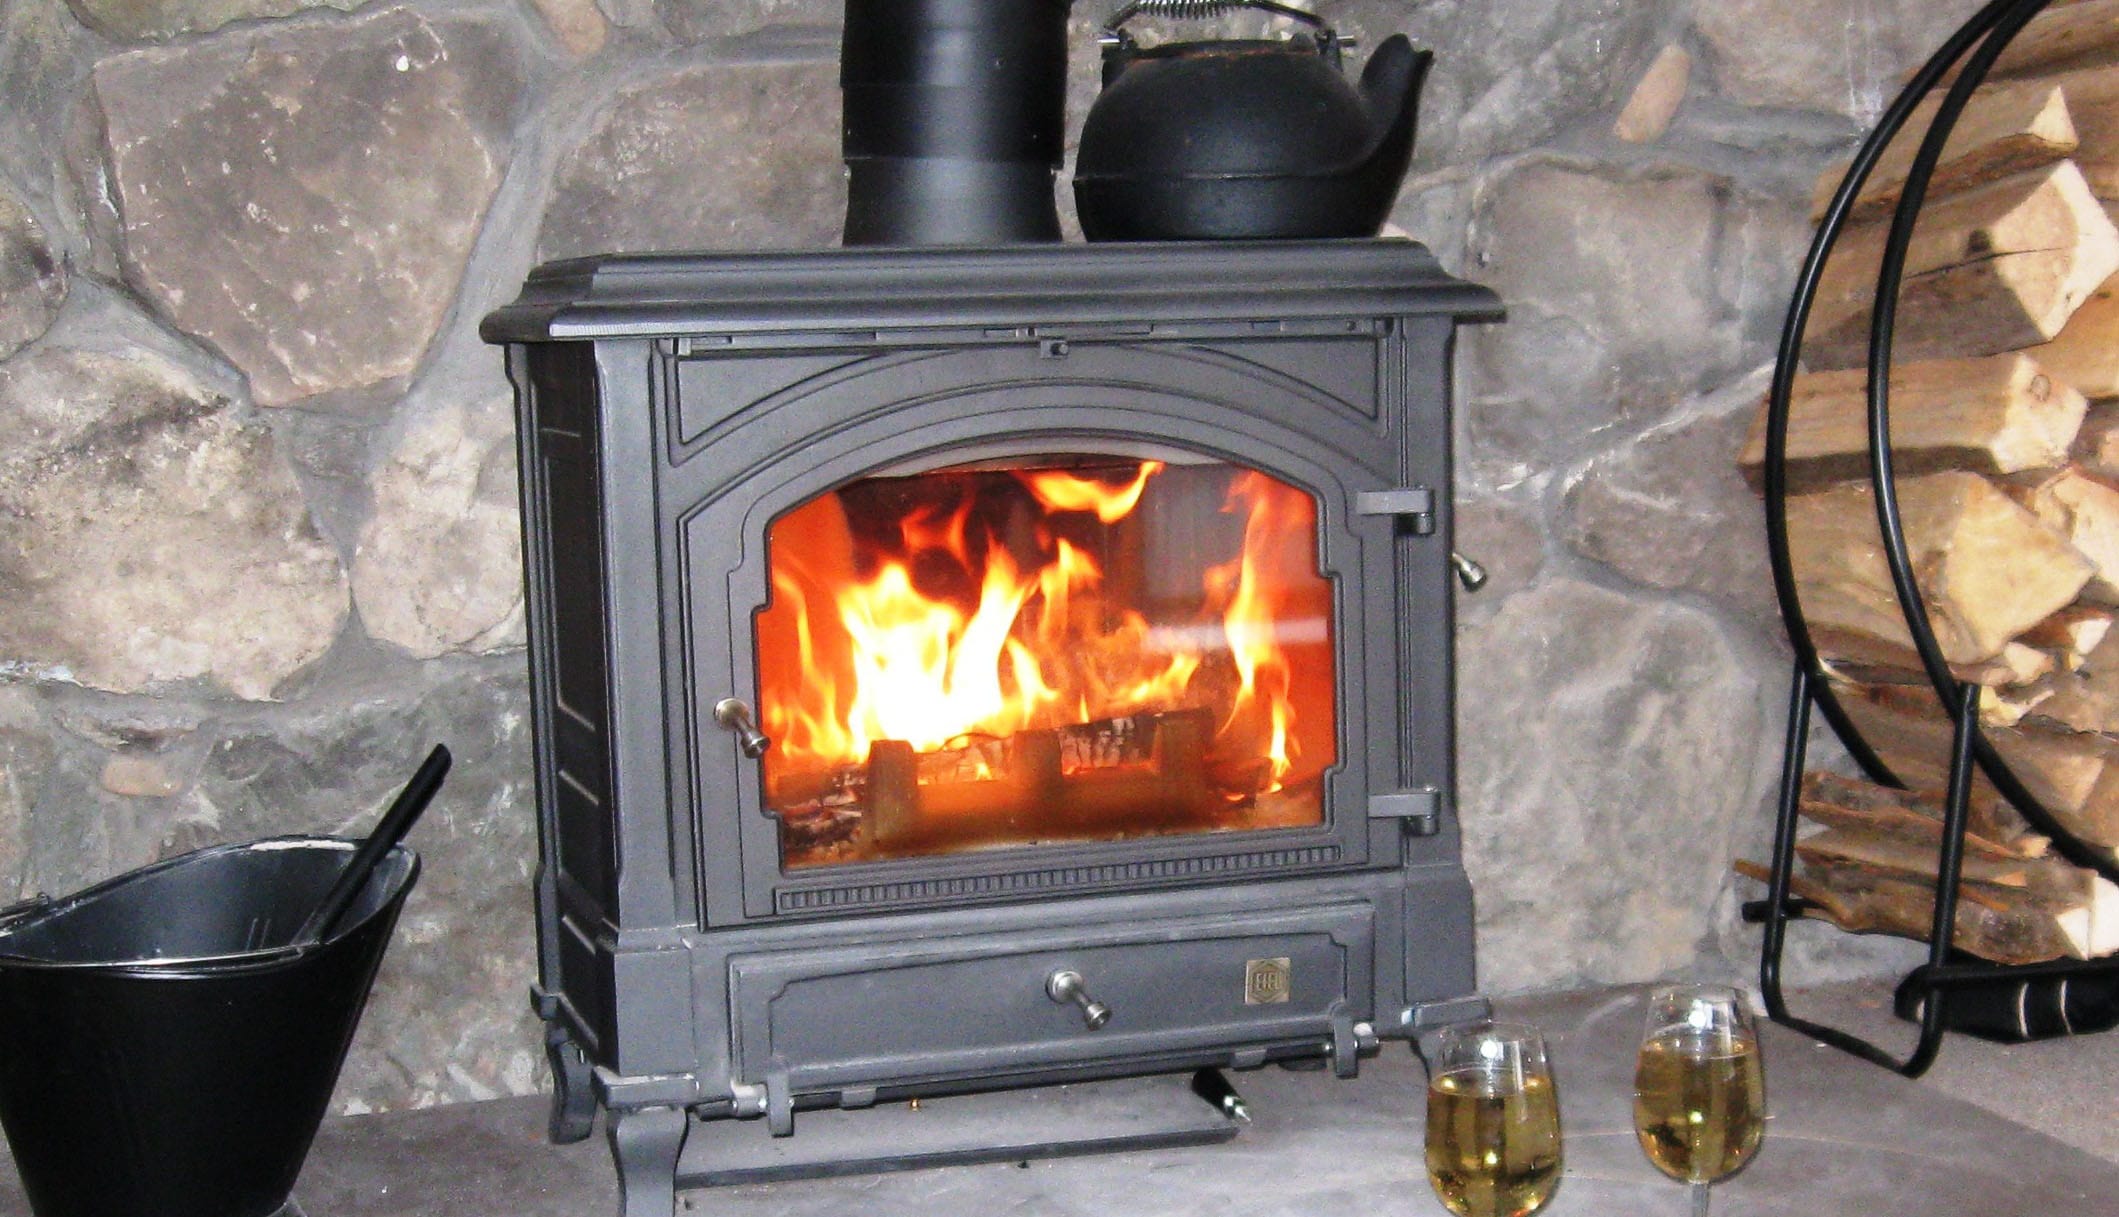 Cozy up in front of the wood stove!